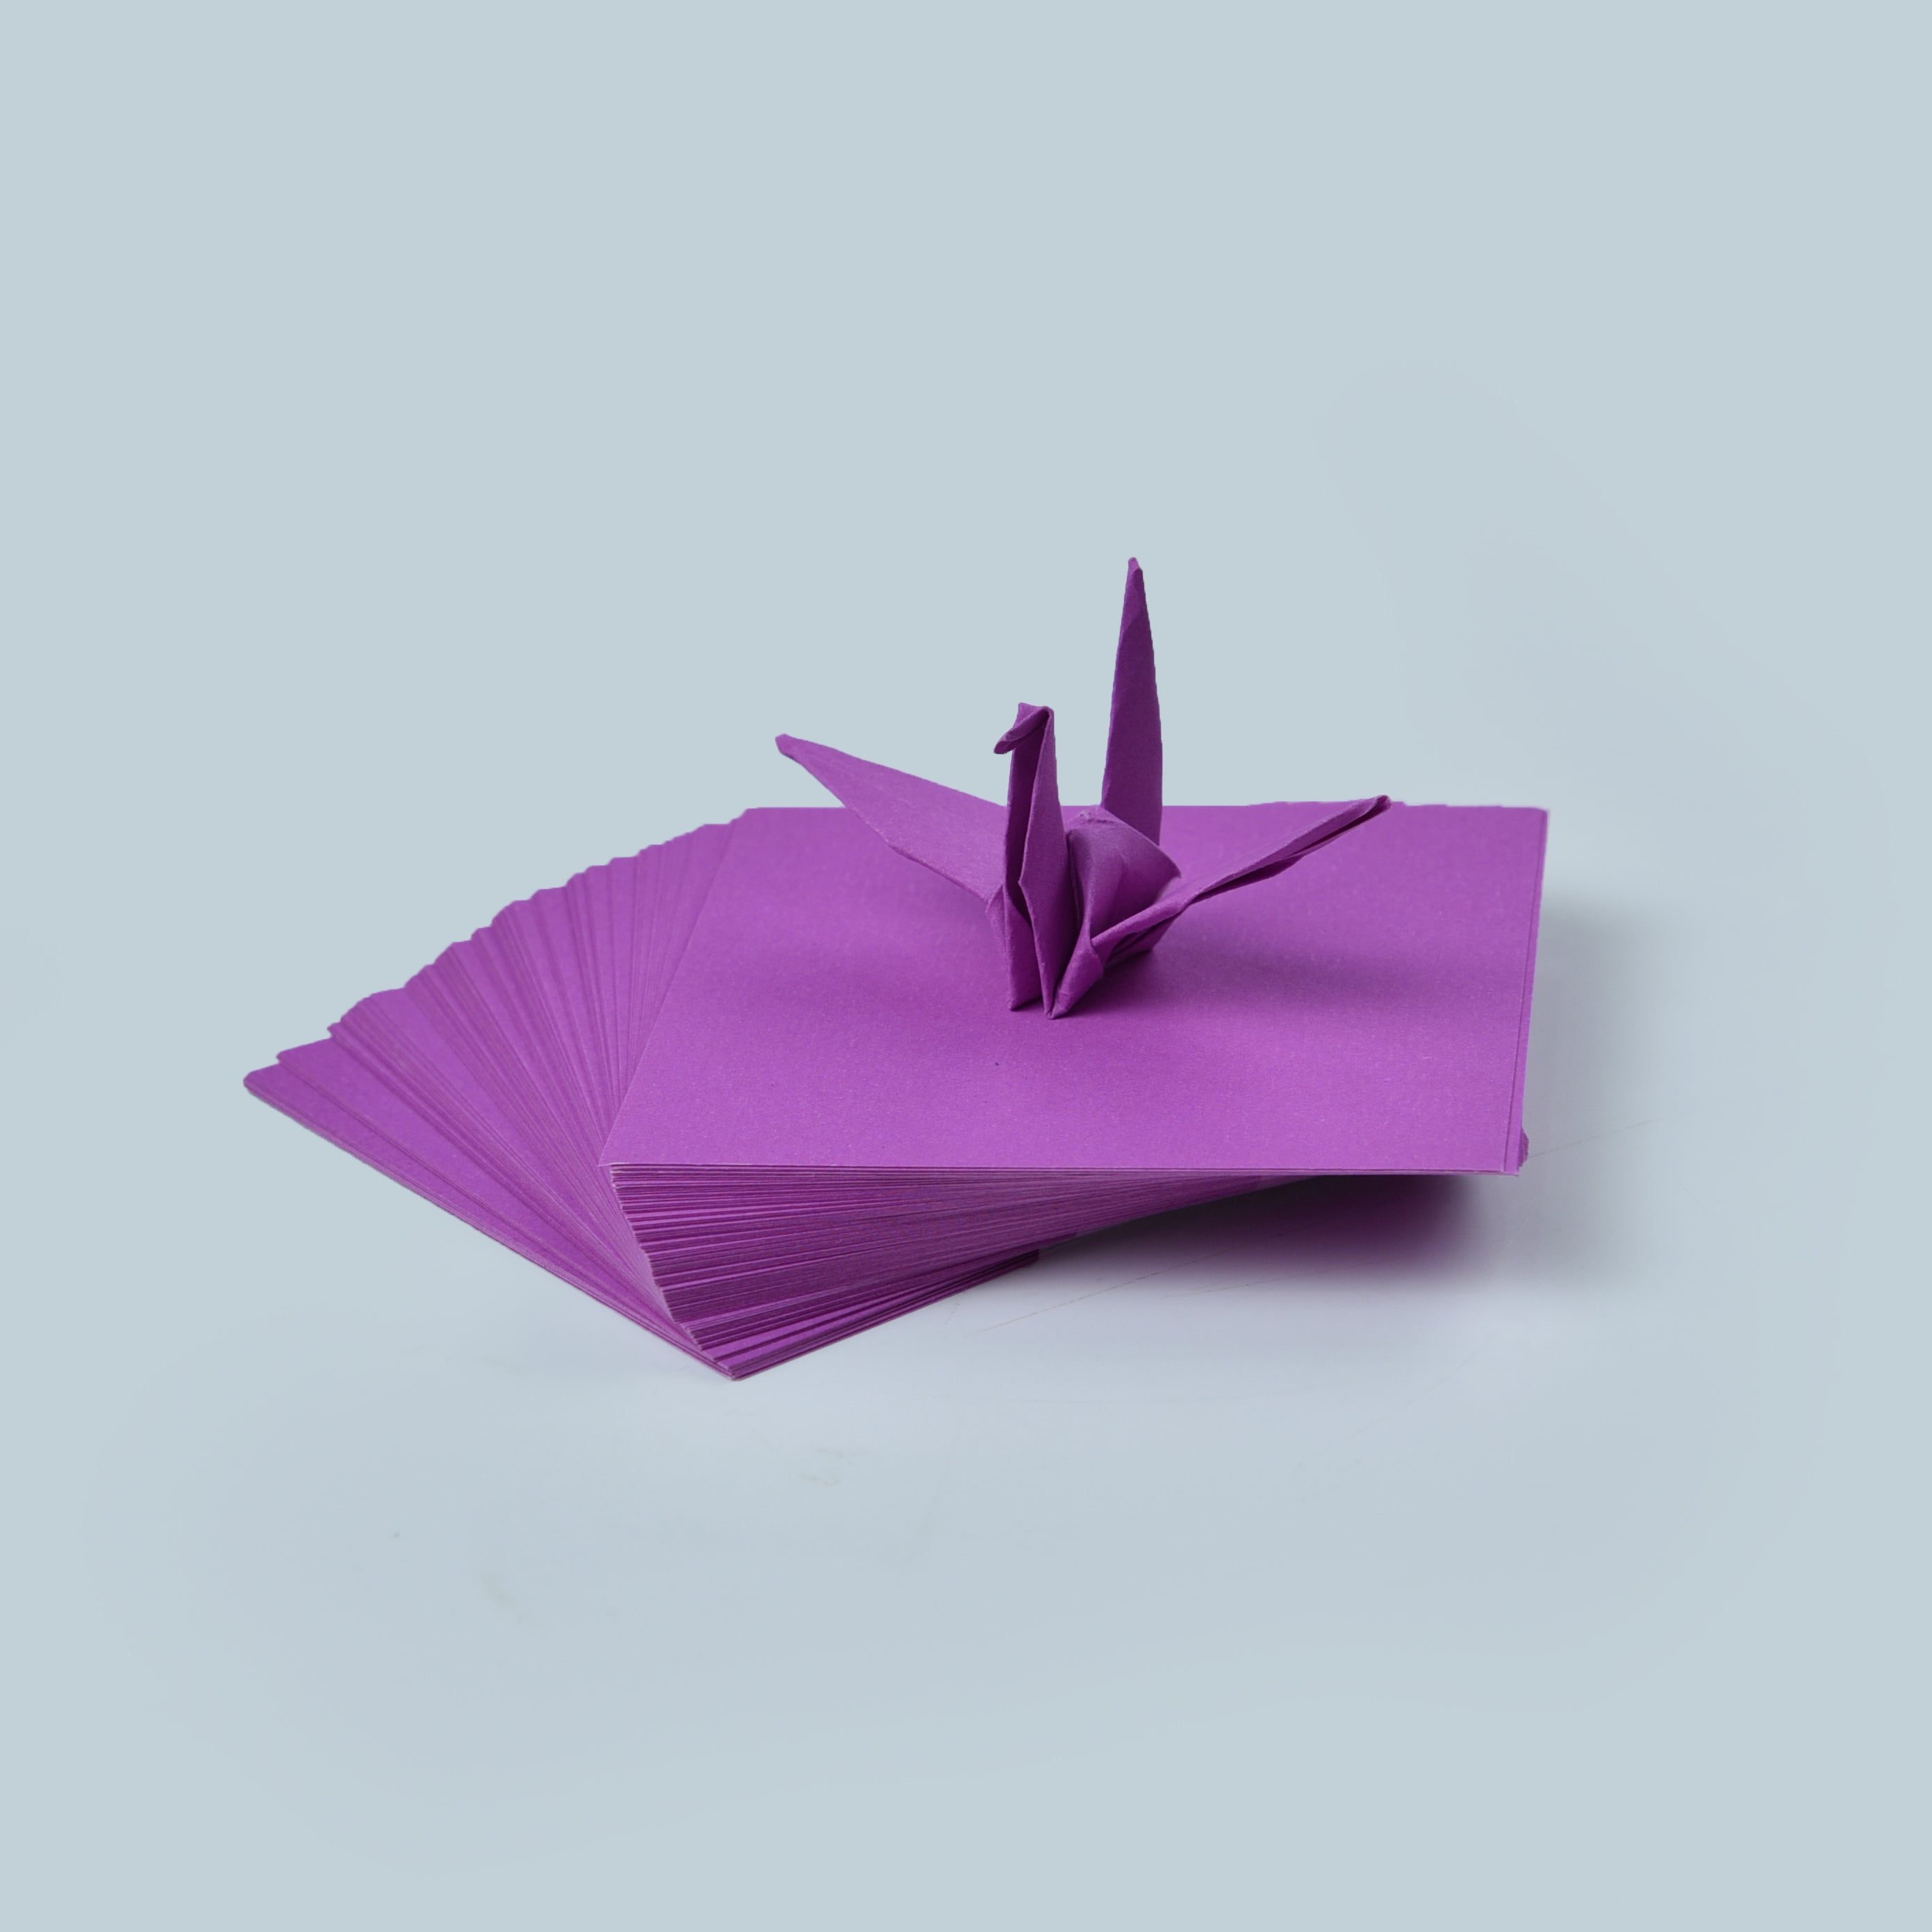 100 Origami Paper Sheets 3x3 inches Square Paper Pack for Folding, Origami Cranes, and Decoration - S08